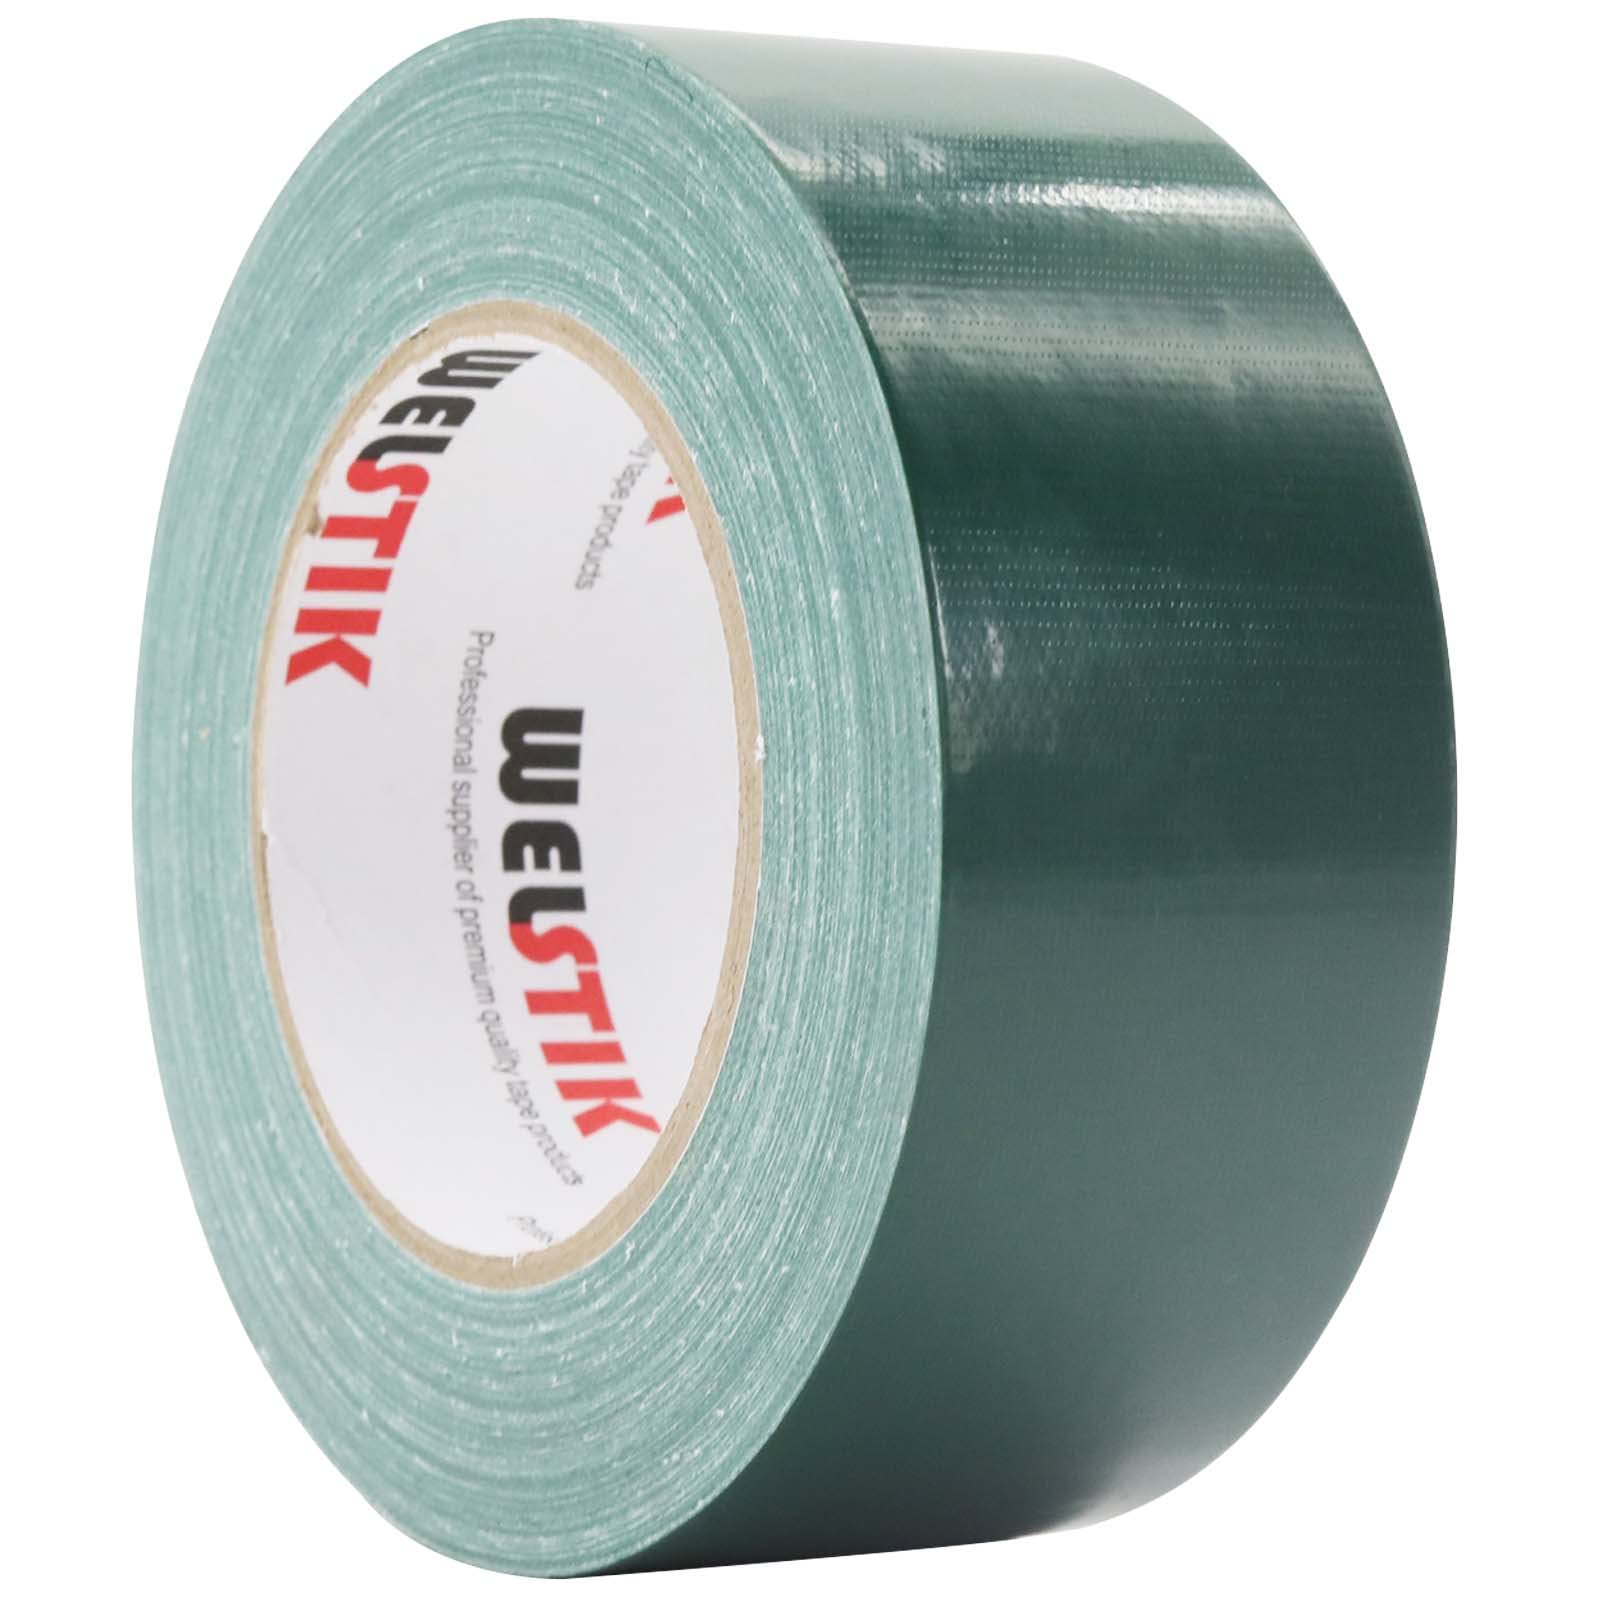 MAT Duct Tape Brown Industrial Grade, 3/4 inch x 60 yds. Waterproof, UV  Resistant for Crafts, Home Improvement, Repairs, & Projects